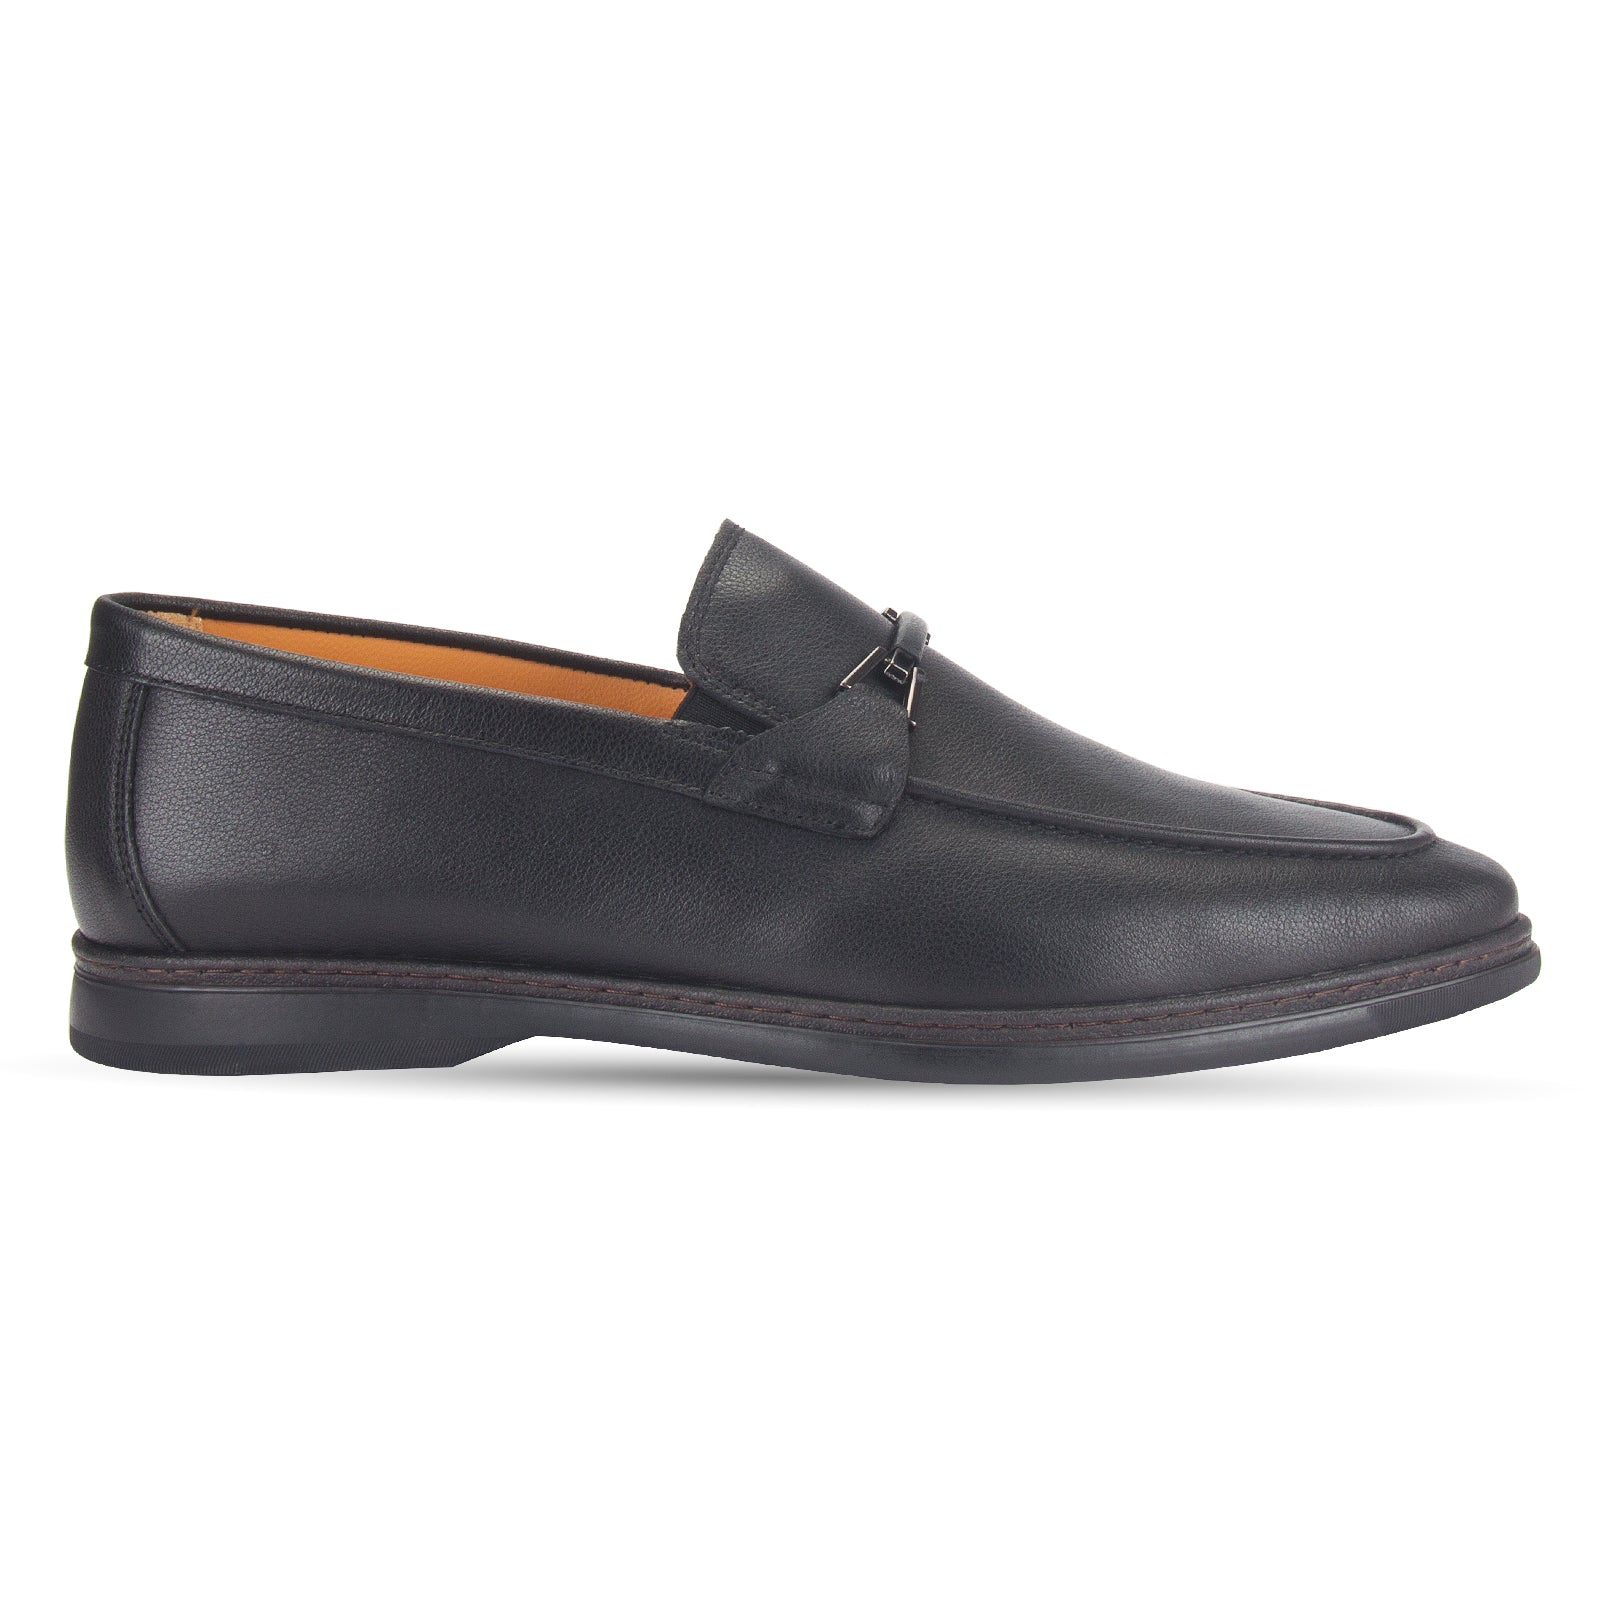 Pavers England's Best Formal Loafers for Men for Different Occasions